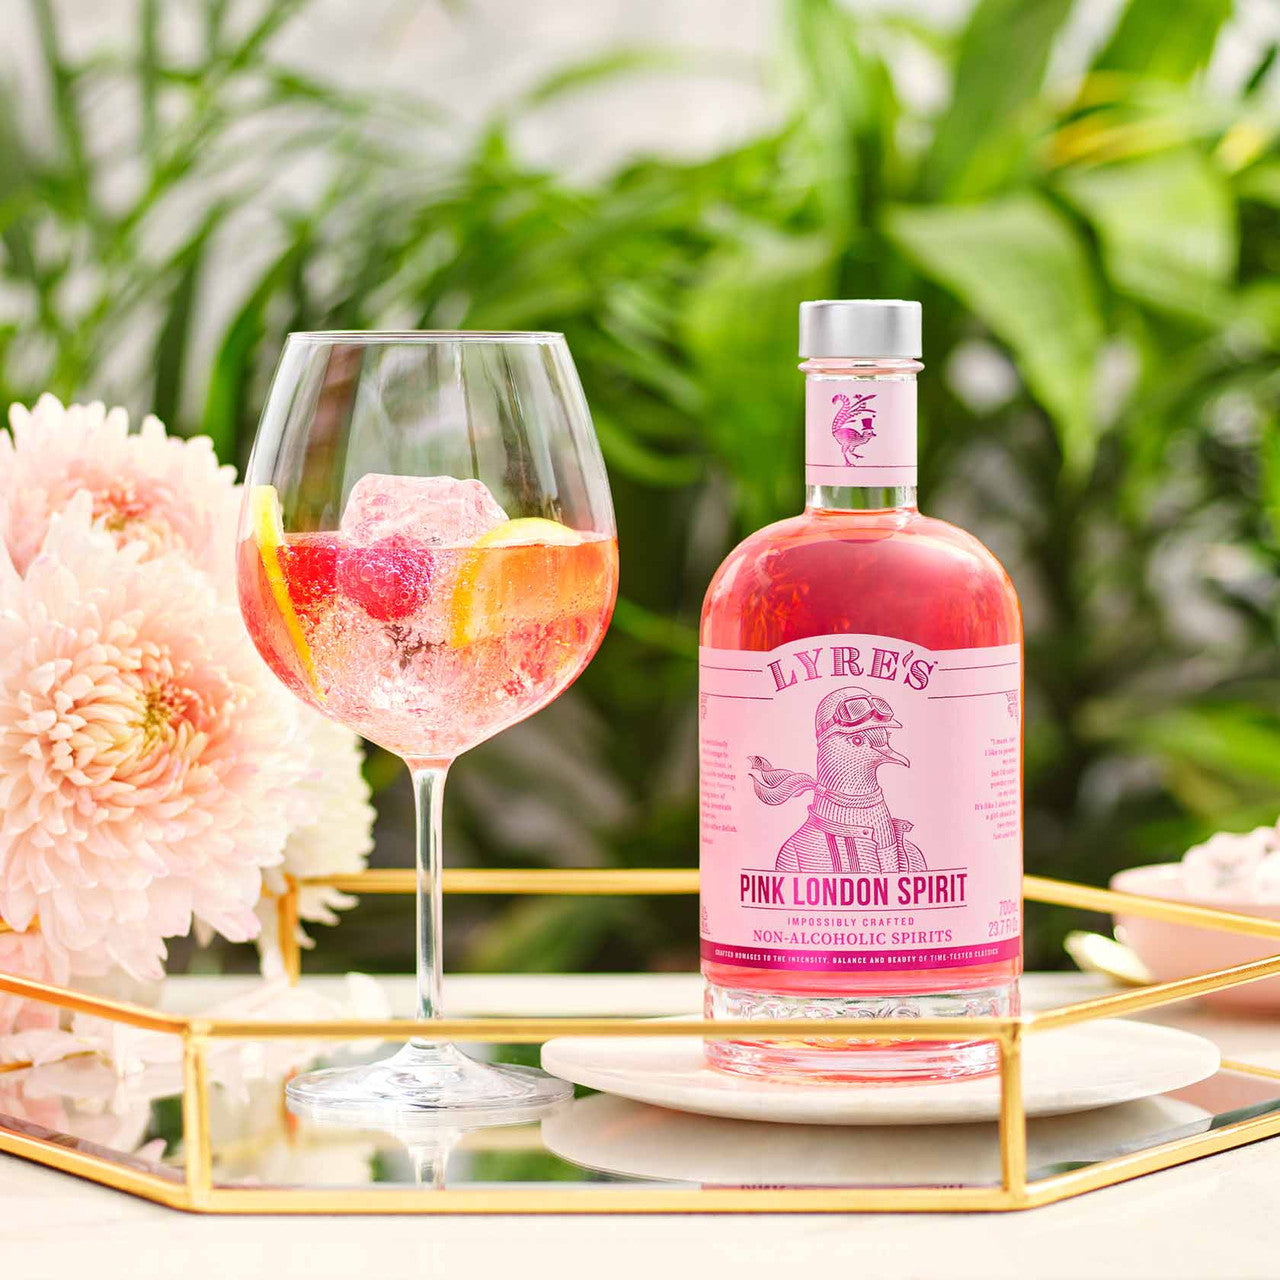 Lyre's Non-Alcoholic Pink London Spirit Gin Poured